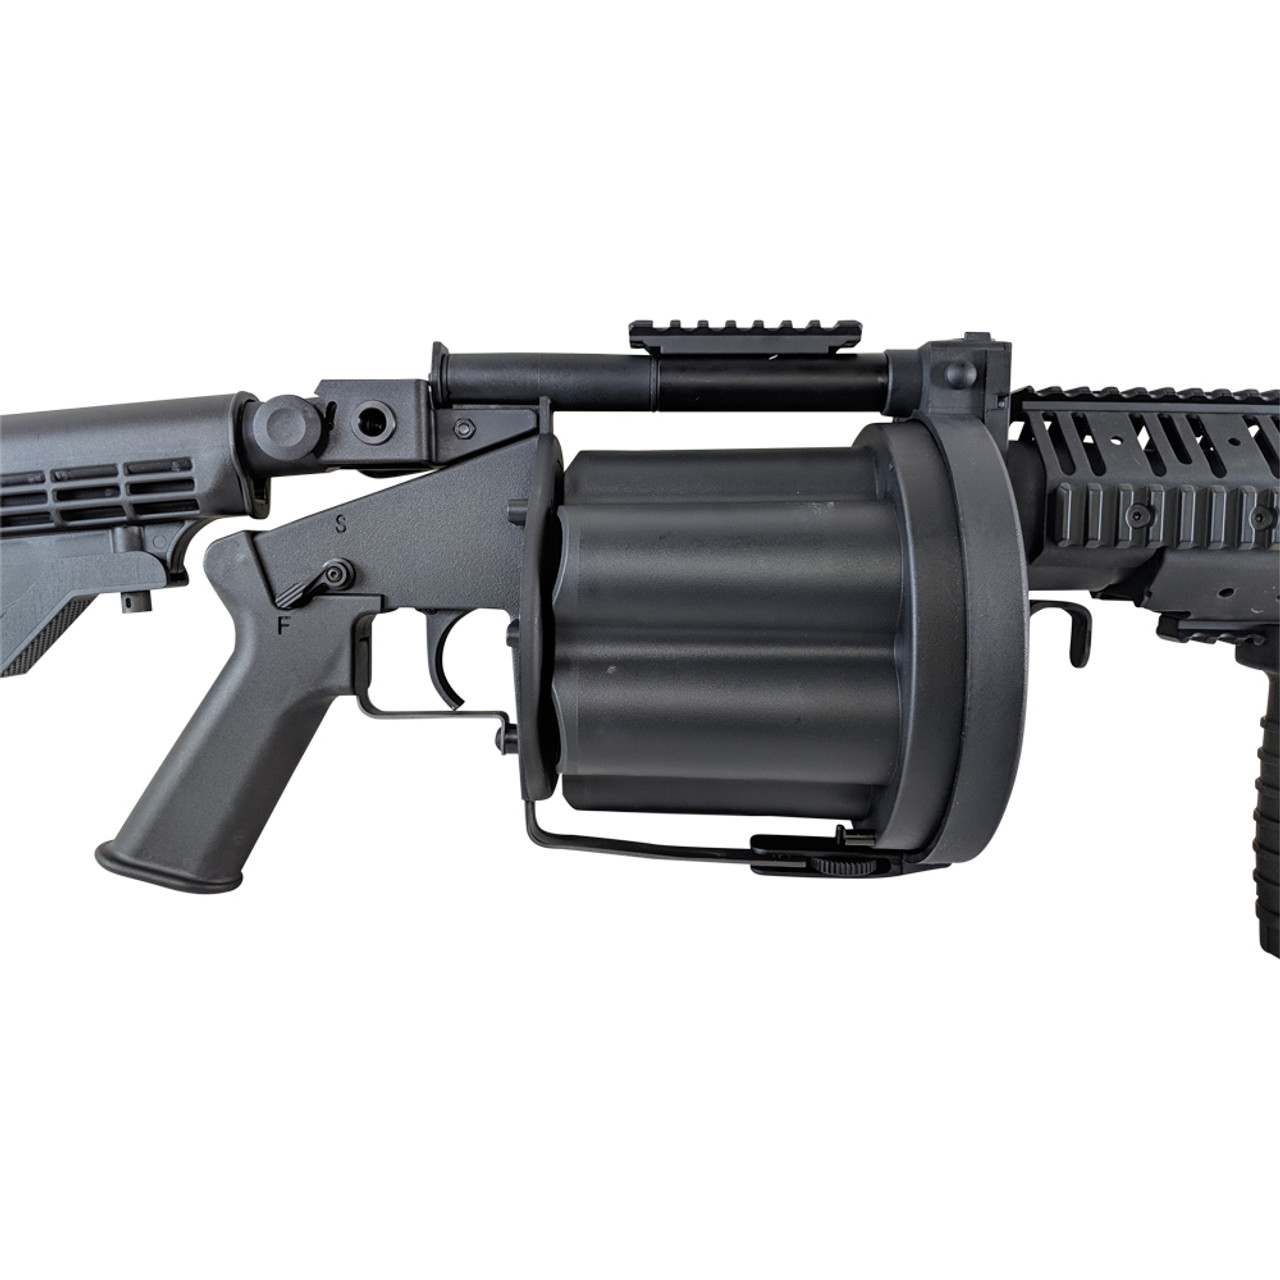 MULTIPLE GRENADE AIRSOFT LAUNCHER BLACK low price of $144.49